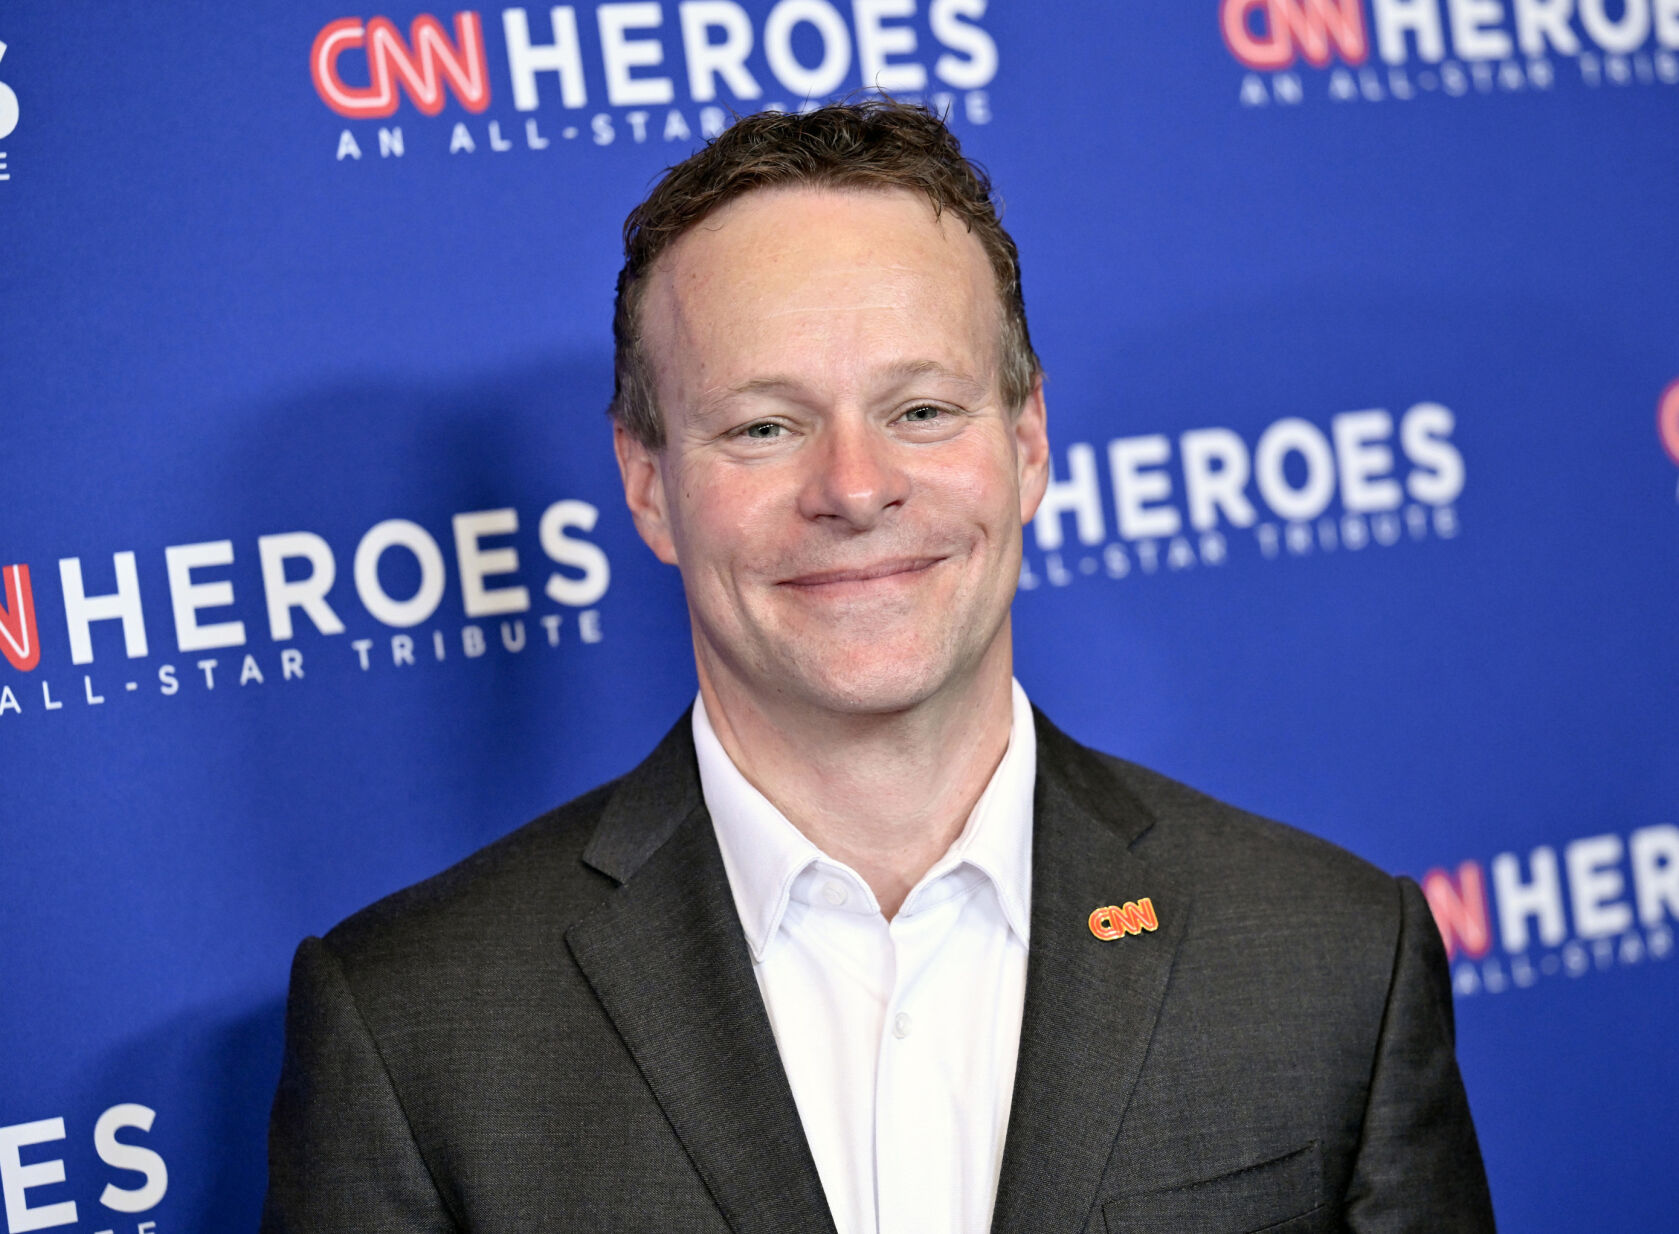 <p>FILE - Chris Licht attends the 16th annual CNN Heroes All-Star Tribute on Dec. 11, 2022, in New York. (Photo by Evan Agostini/Invision/AP, File)</p>   PHOTO CREDIT: Evan Agostini 